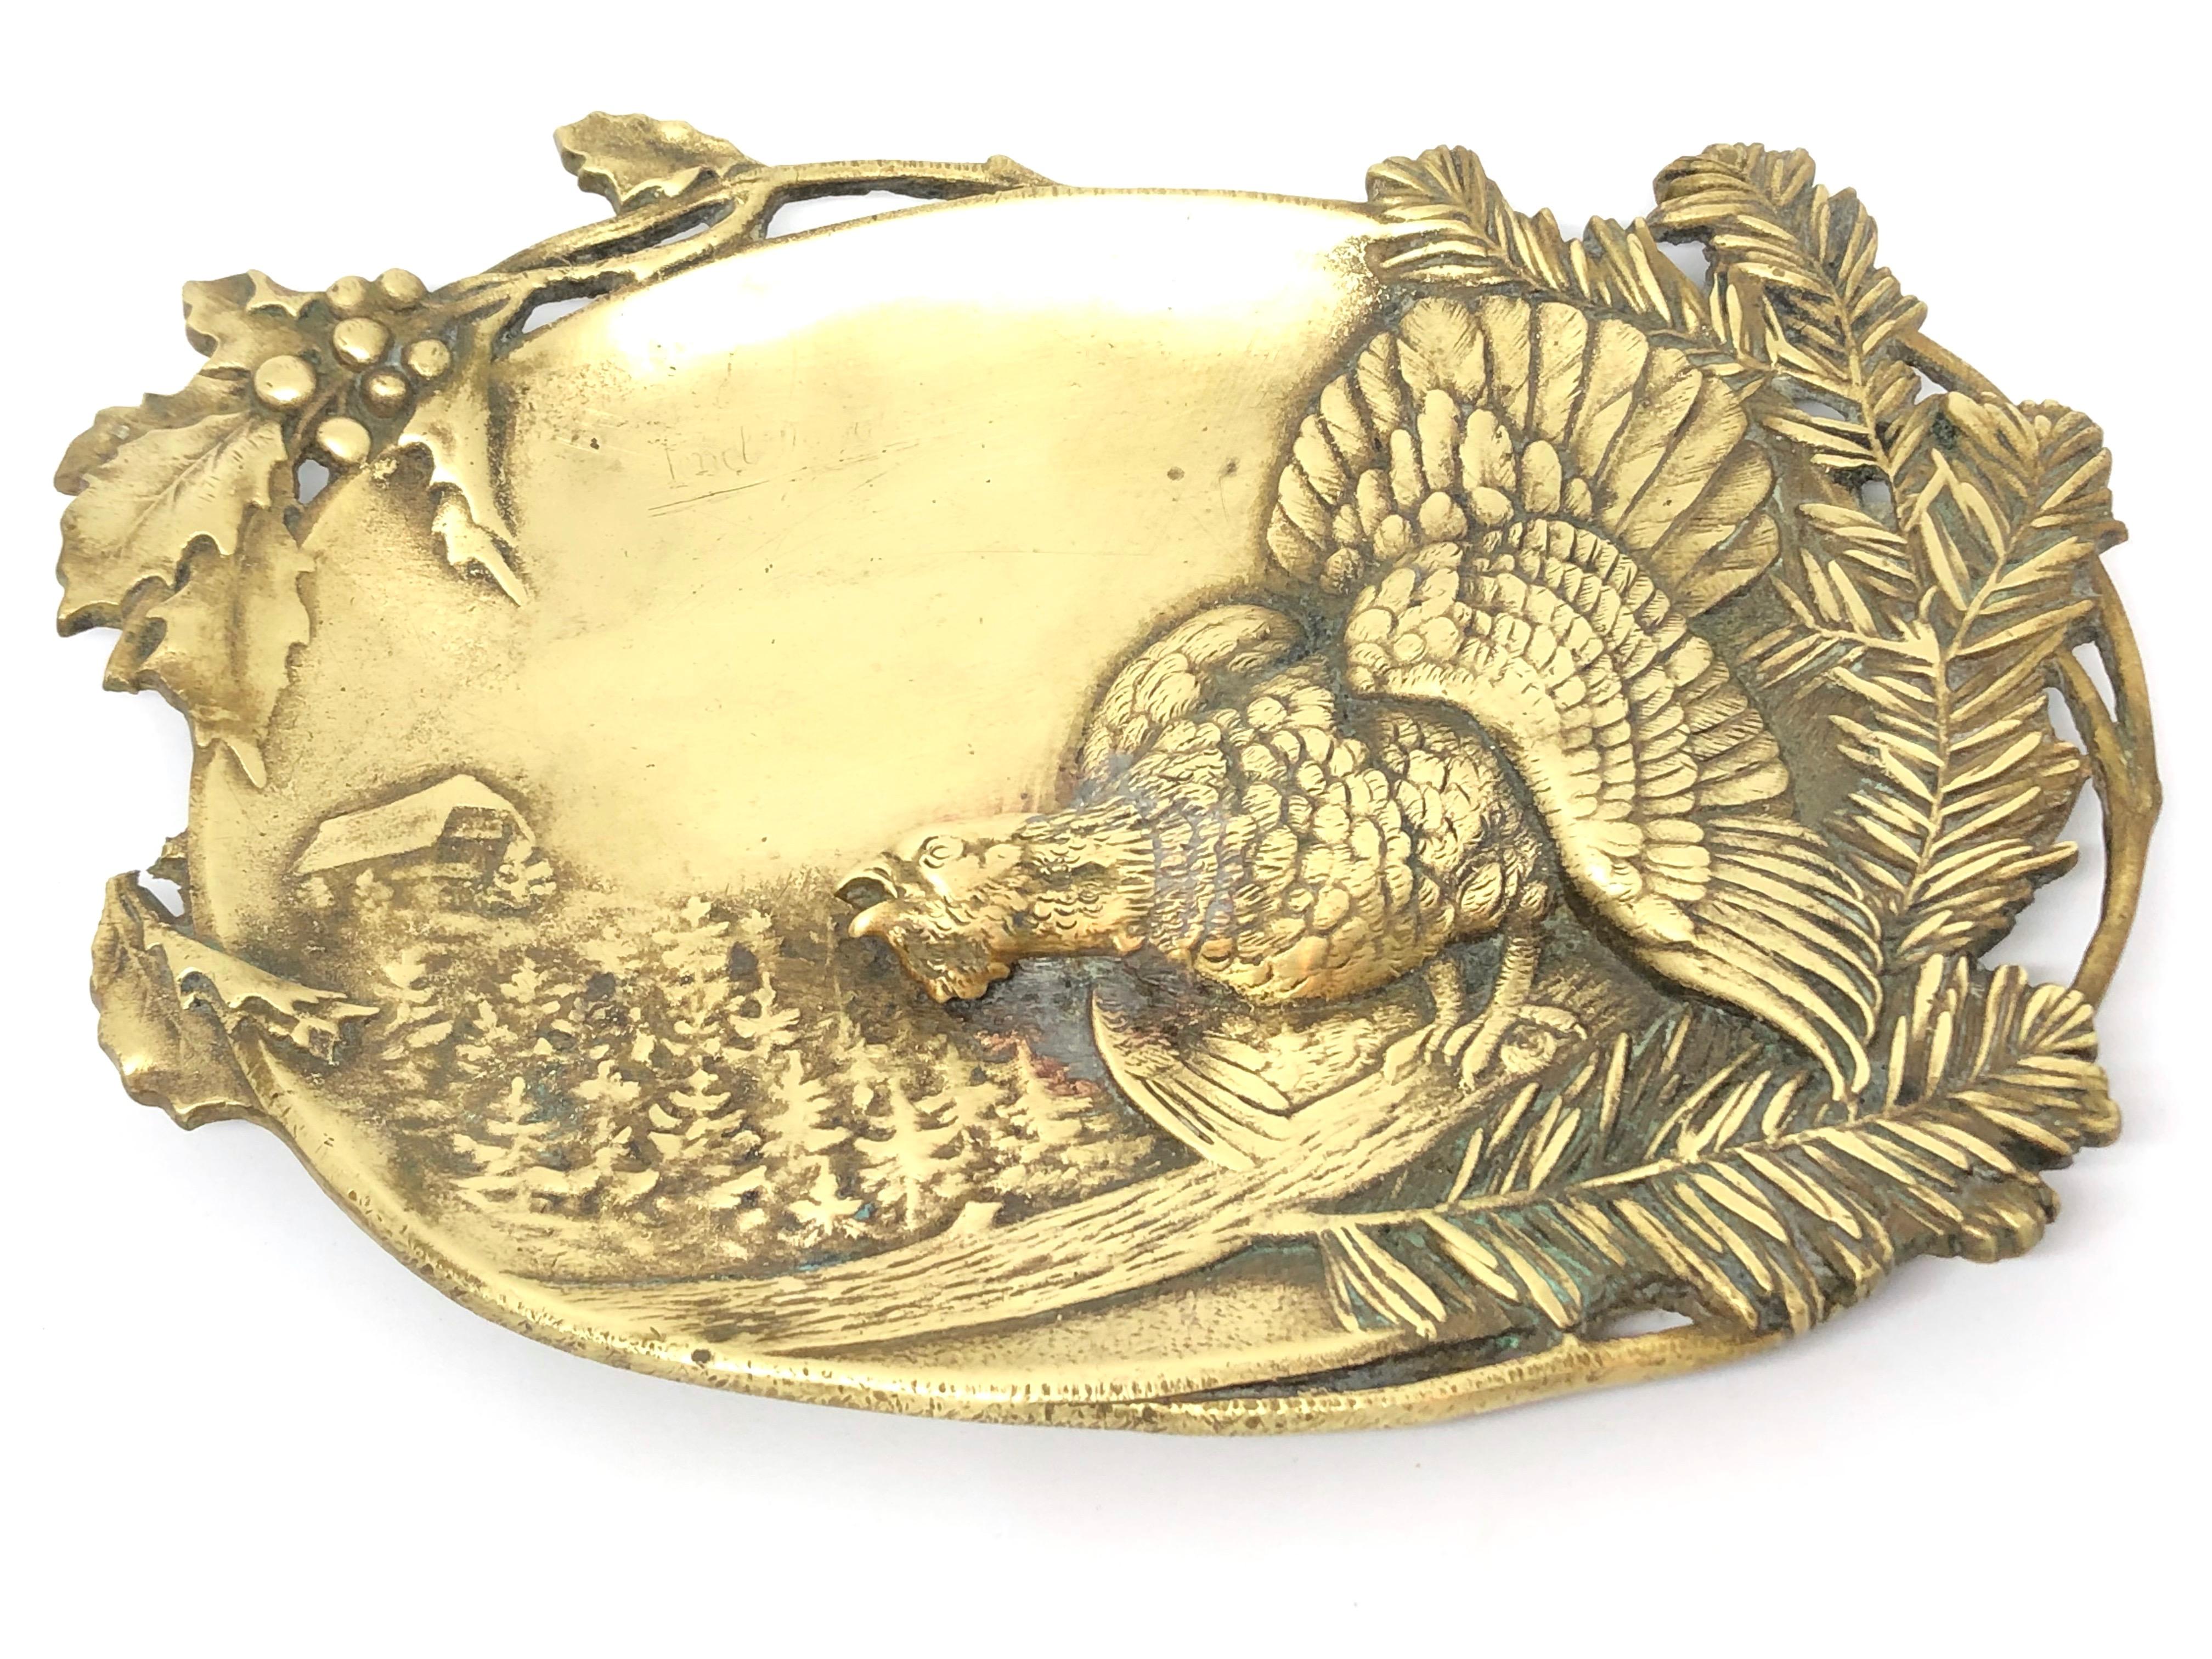 Gorgeous bronze figural catchall with a wood grouse and mountain motif . It's a beautiful piece for every sideboard or just for your desk. Made in the 1920s this beautiful decorative piece is an addition to every room.